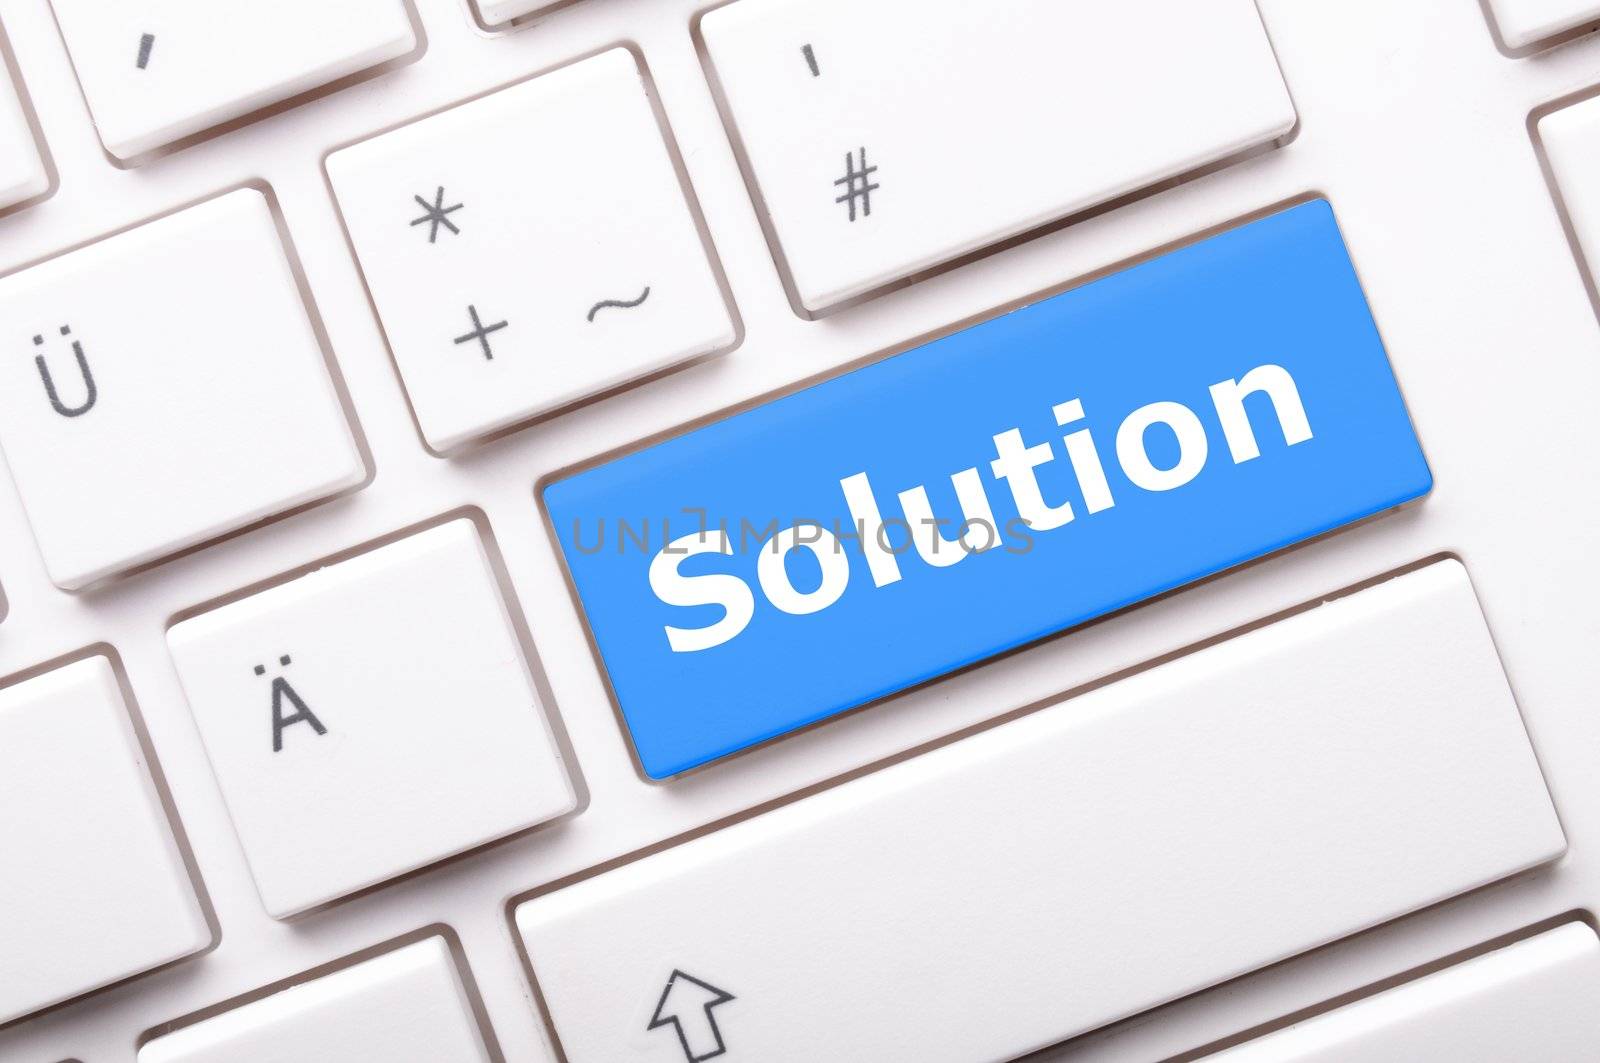 business solutions or problem concept with word on computer keyboard